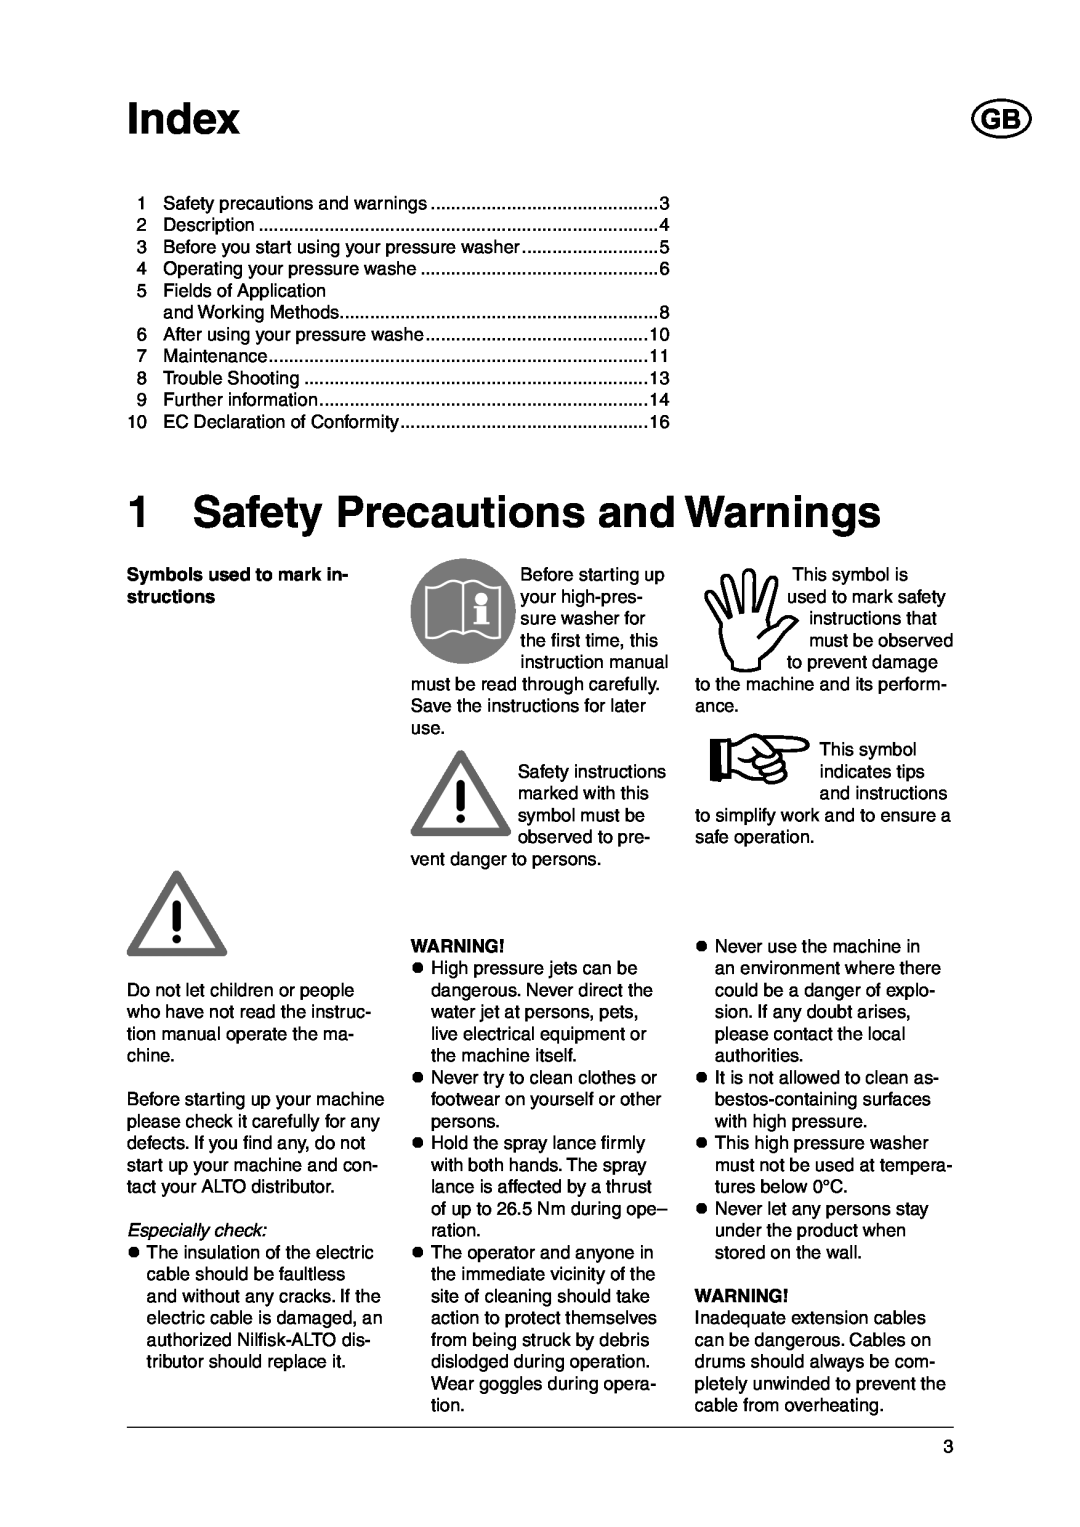 Nilfisk-ALTO C 120.1 Index, Safety Precautions and Warnings, Symbols used to mark in- structions, Especially check 